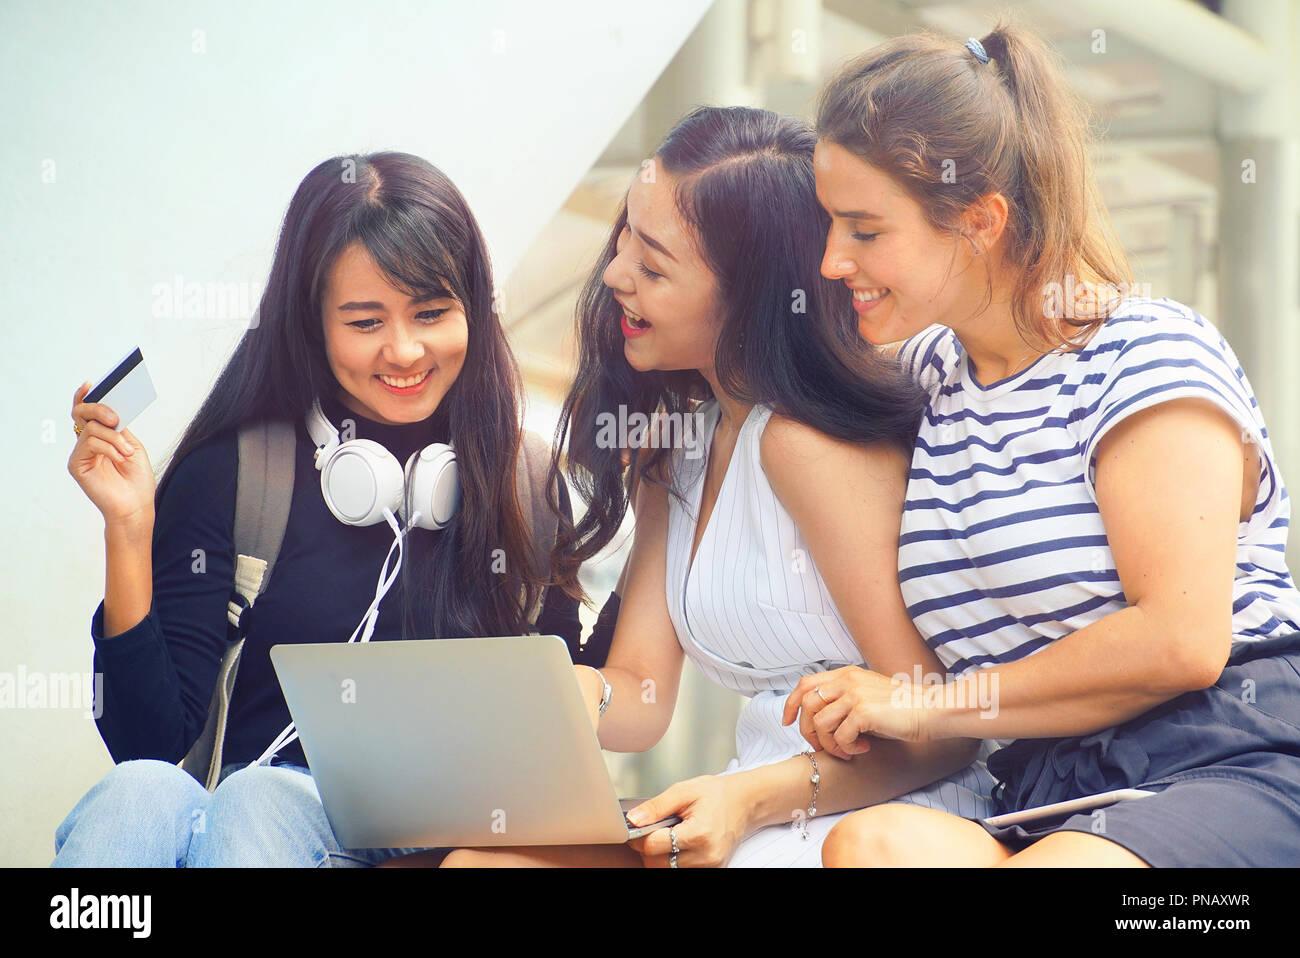 Three women sitting together and feel happy with shopping online Stock Photo